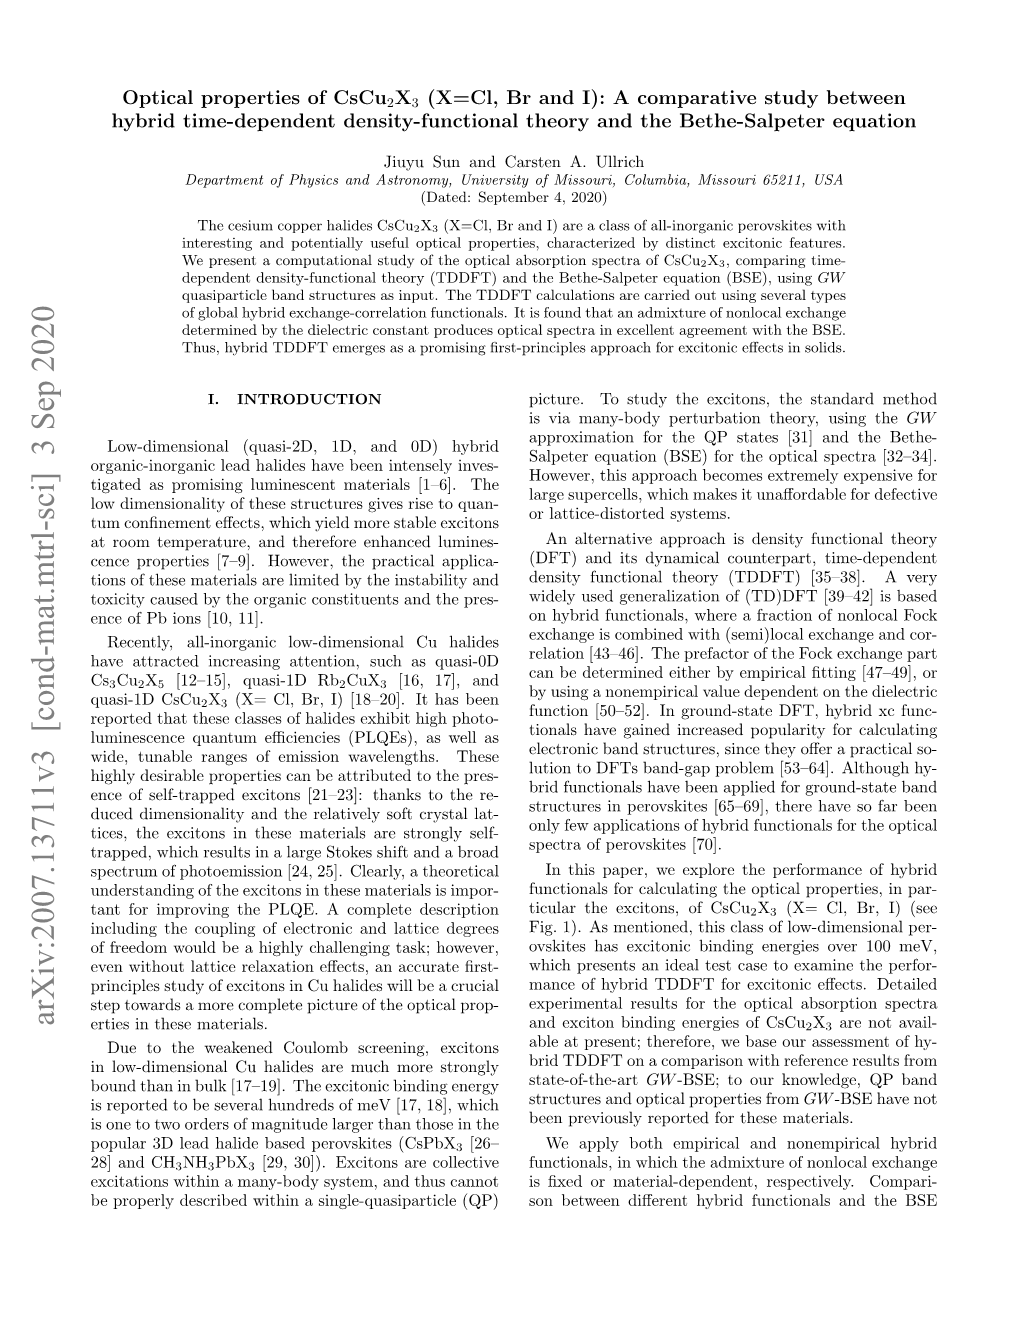 Arxiv:2007.13711V3 [Cond-Mat.Mtrl-Sci] 3 Sep 2020 Erties in These Materials